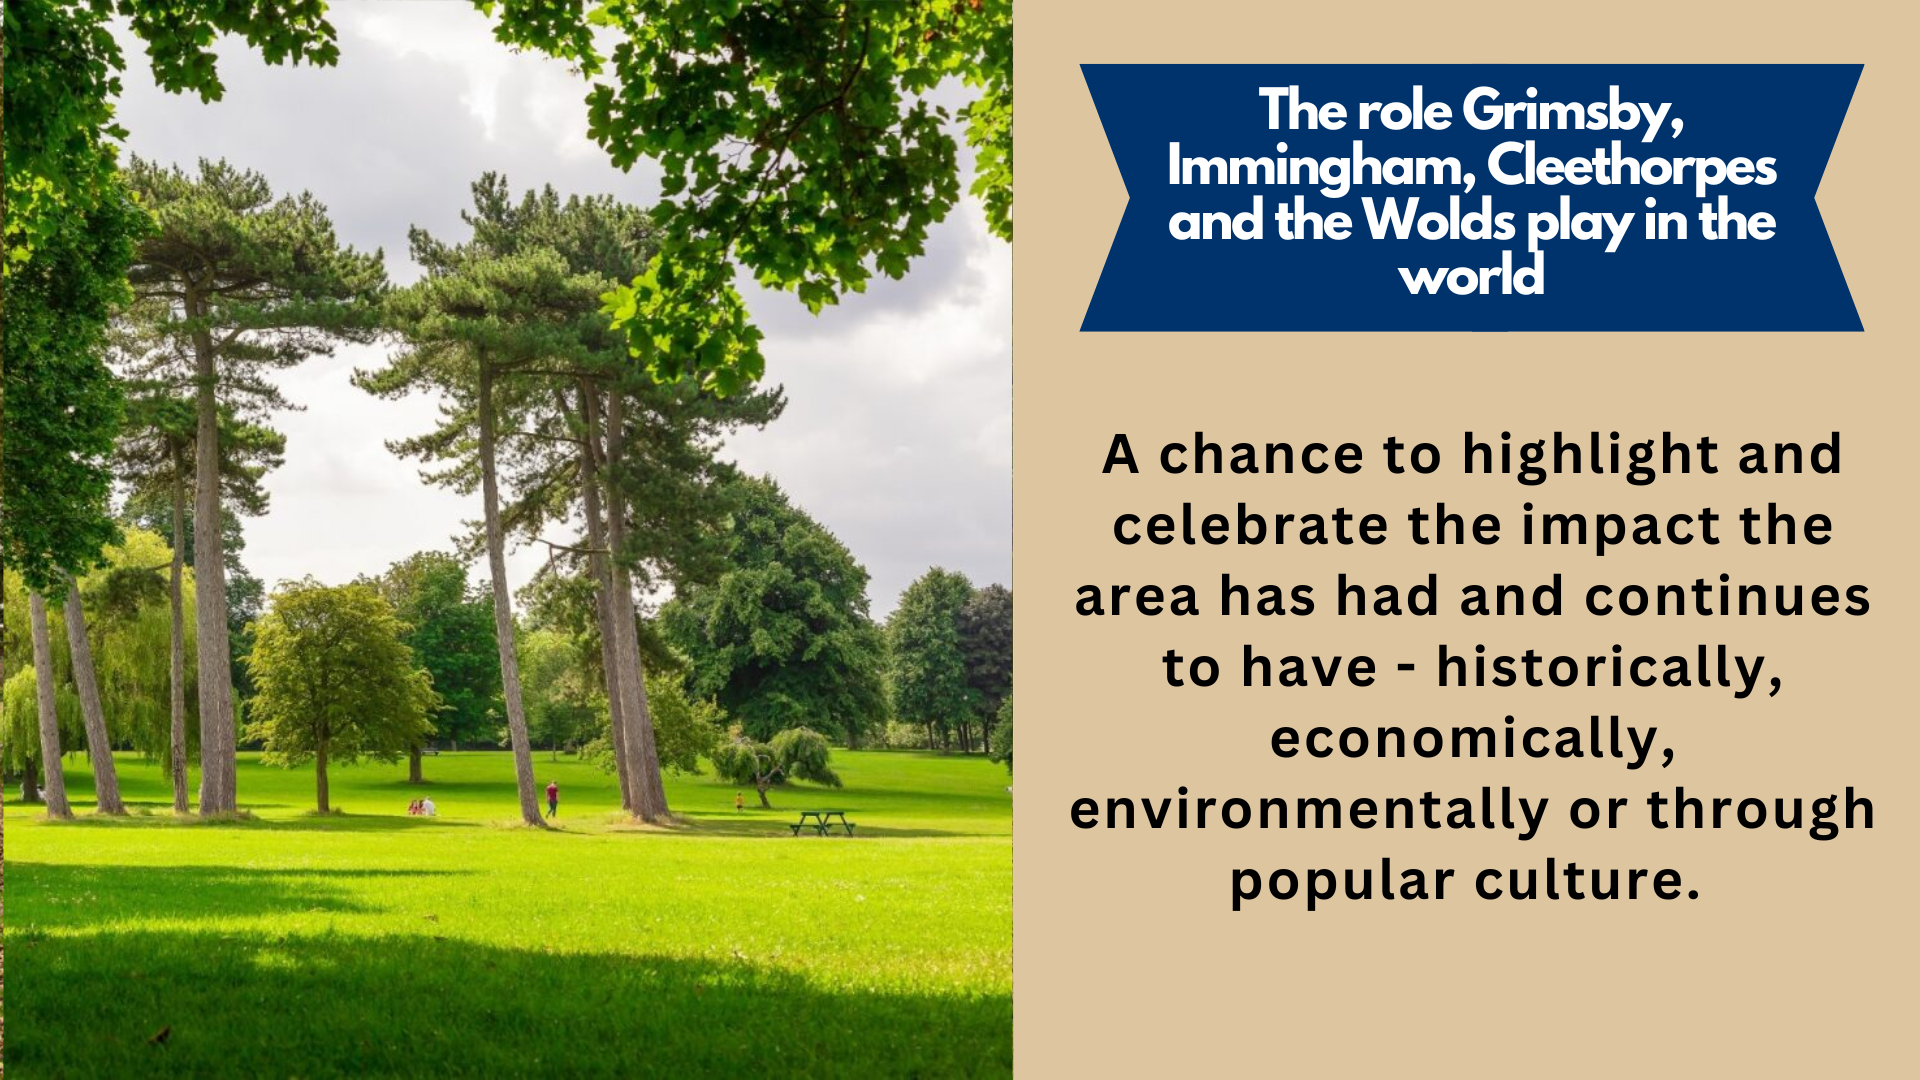 The role Grimsby, Immingham, Cleethorpes and the Wolds play in the world. A chance to highlight and celebrate the impact the area has had and continues to have - historically, economically, environmentally or through popular culture.